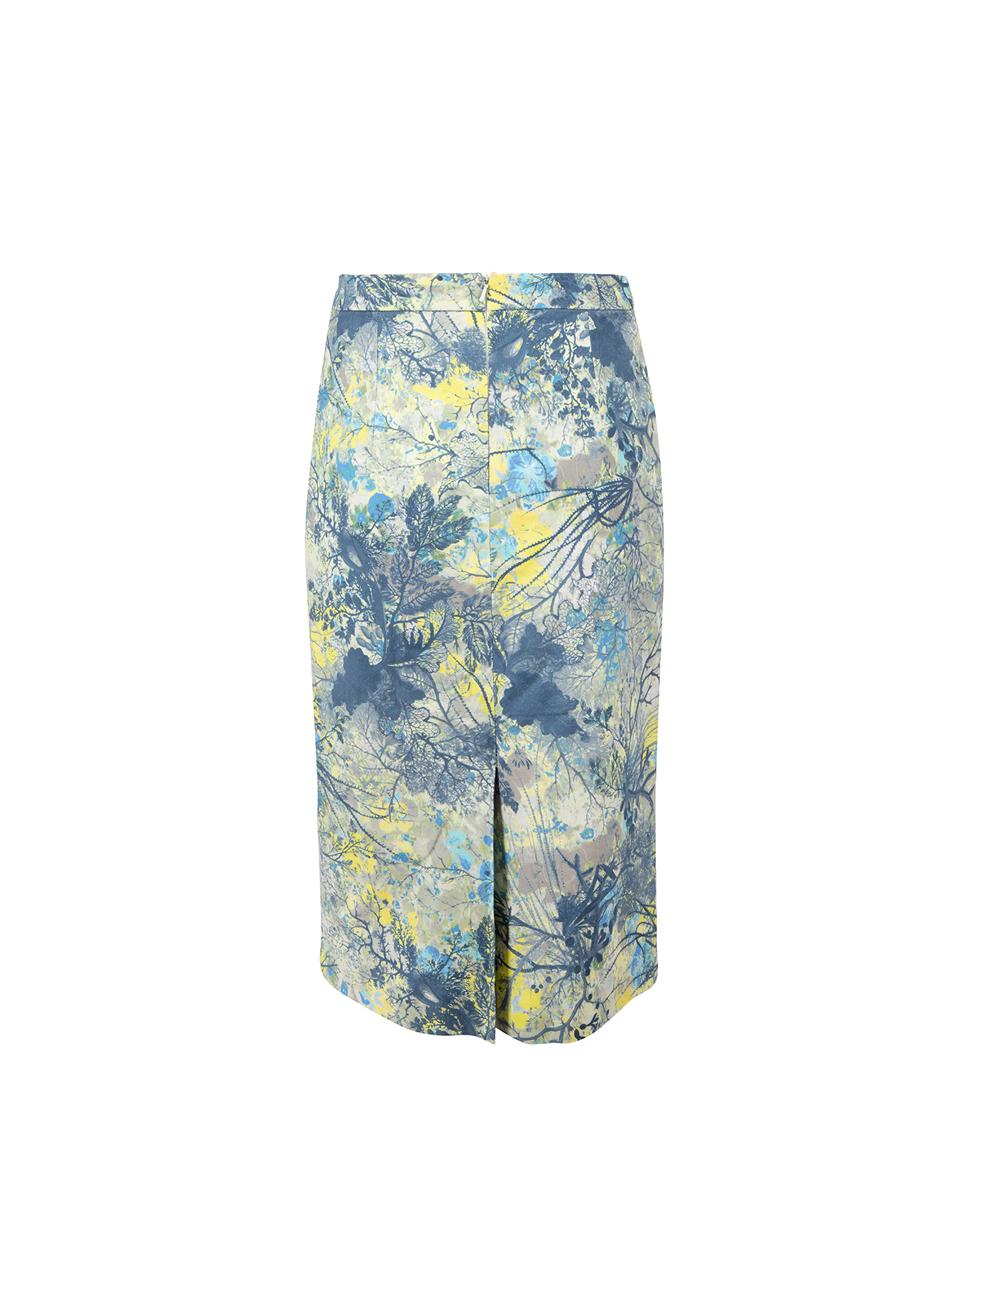 Erdem Graphic Printed Midi Pencil Skirt Size M In Good Condition For Sale In London, GB